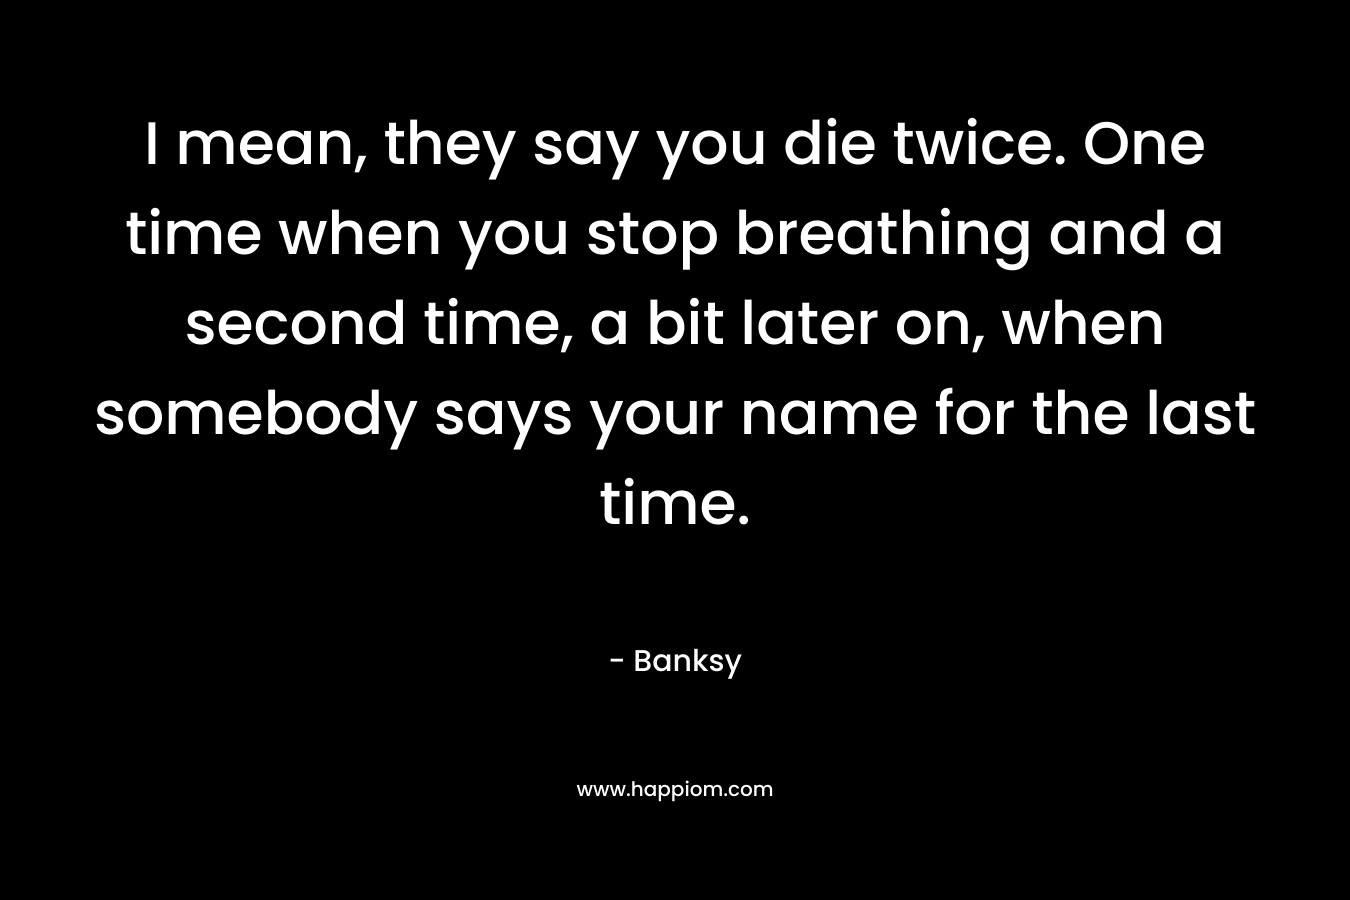 I mean, they say you die twice. One time when you stop breathing and a second time, a bit later on, when somebody says your name for the last time. – Banksy